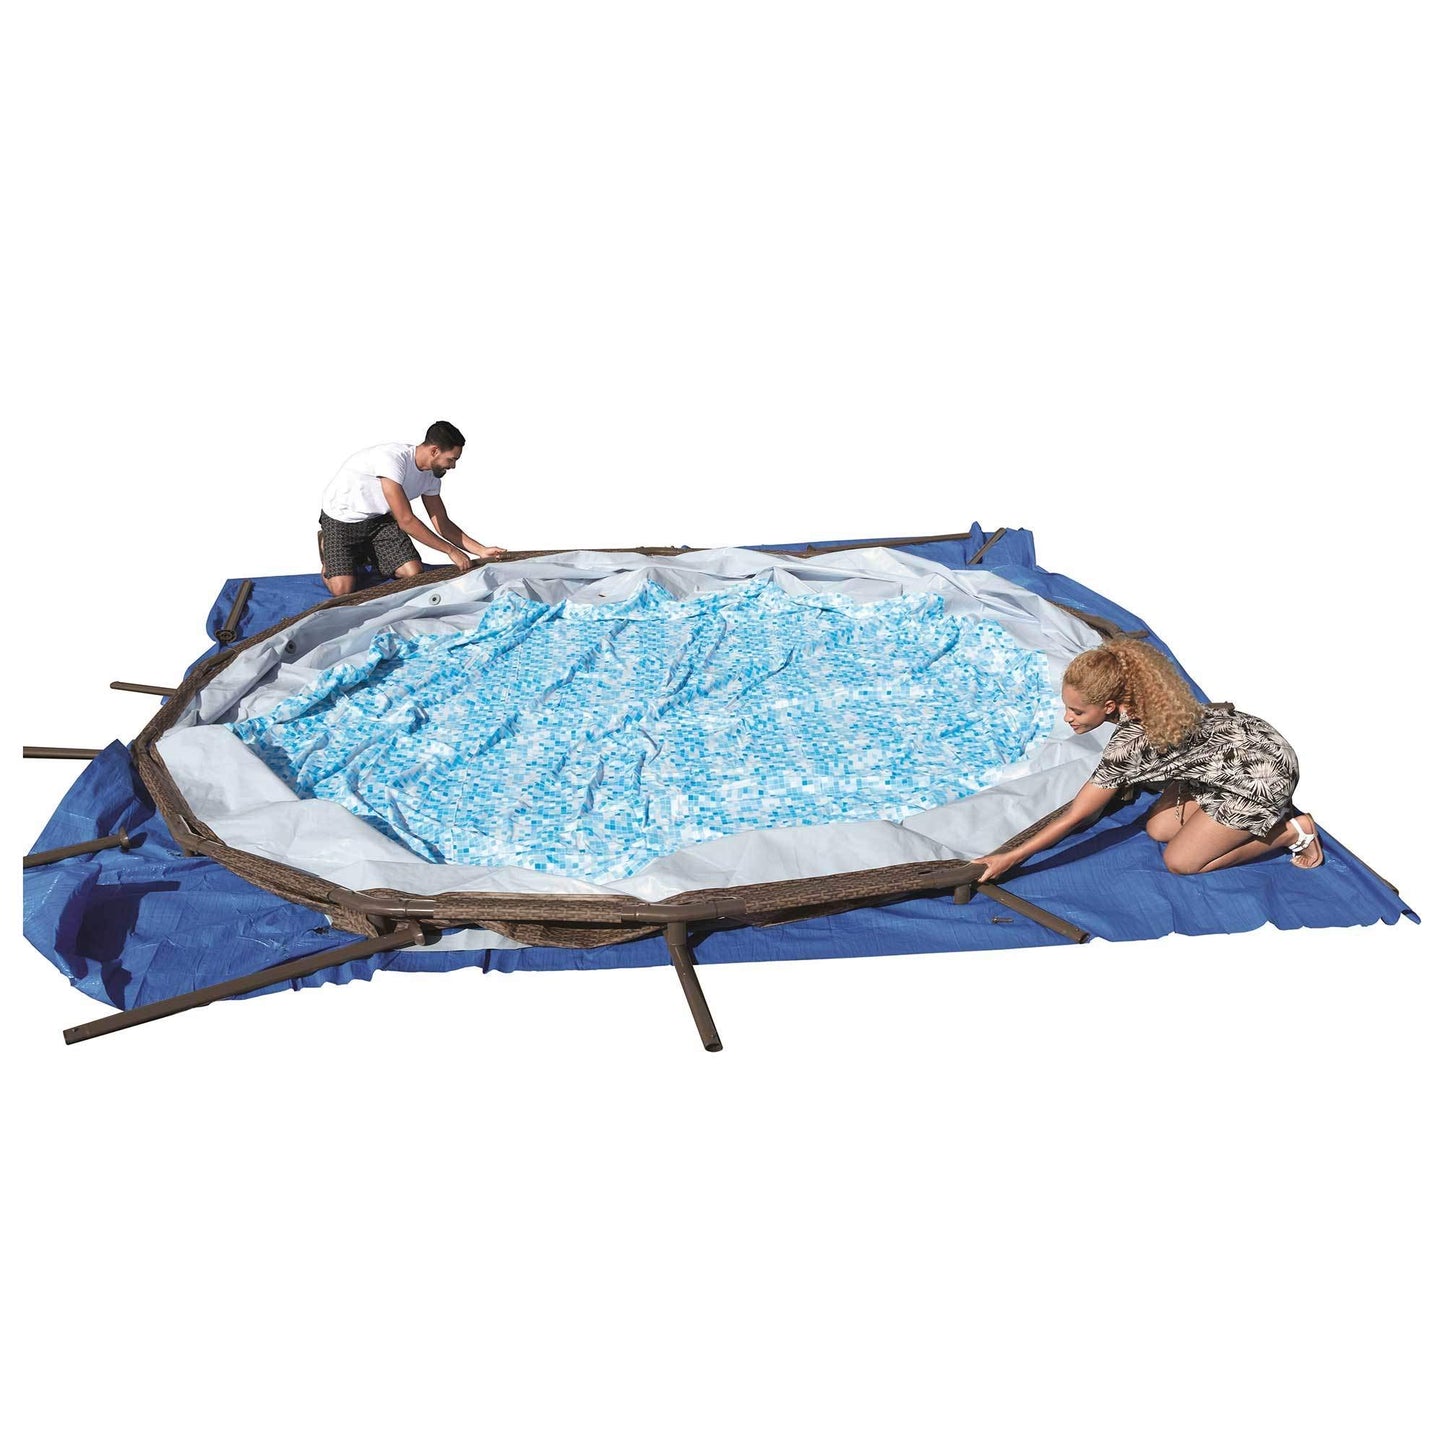 Bestway Power Steel 14 Foot x 42 Inch Round Above Ground Outdoor Backyard Swimming Pool Set with Filter Pump, Ladder, and Pool Cover 14' x 42" Gray